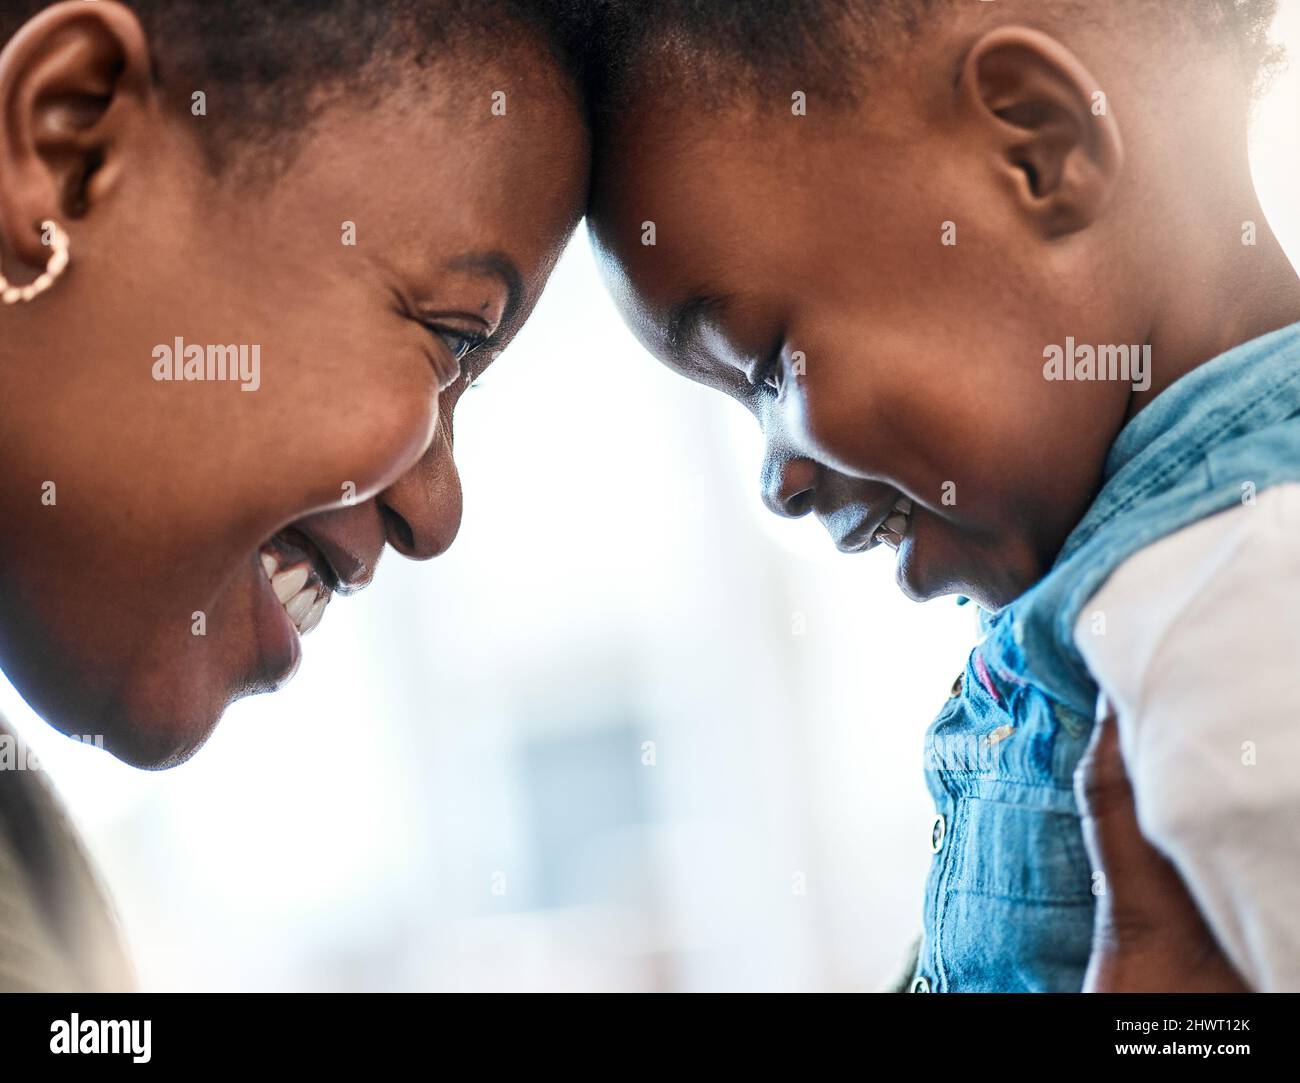 Mommas little sugar plum. Shot of an adorable little girl spending quality time with her mother at home. Stock Photo